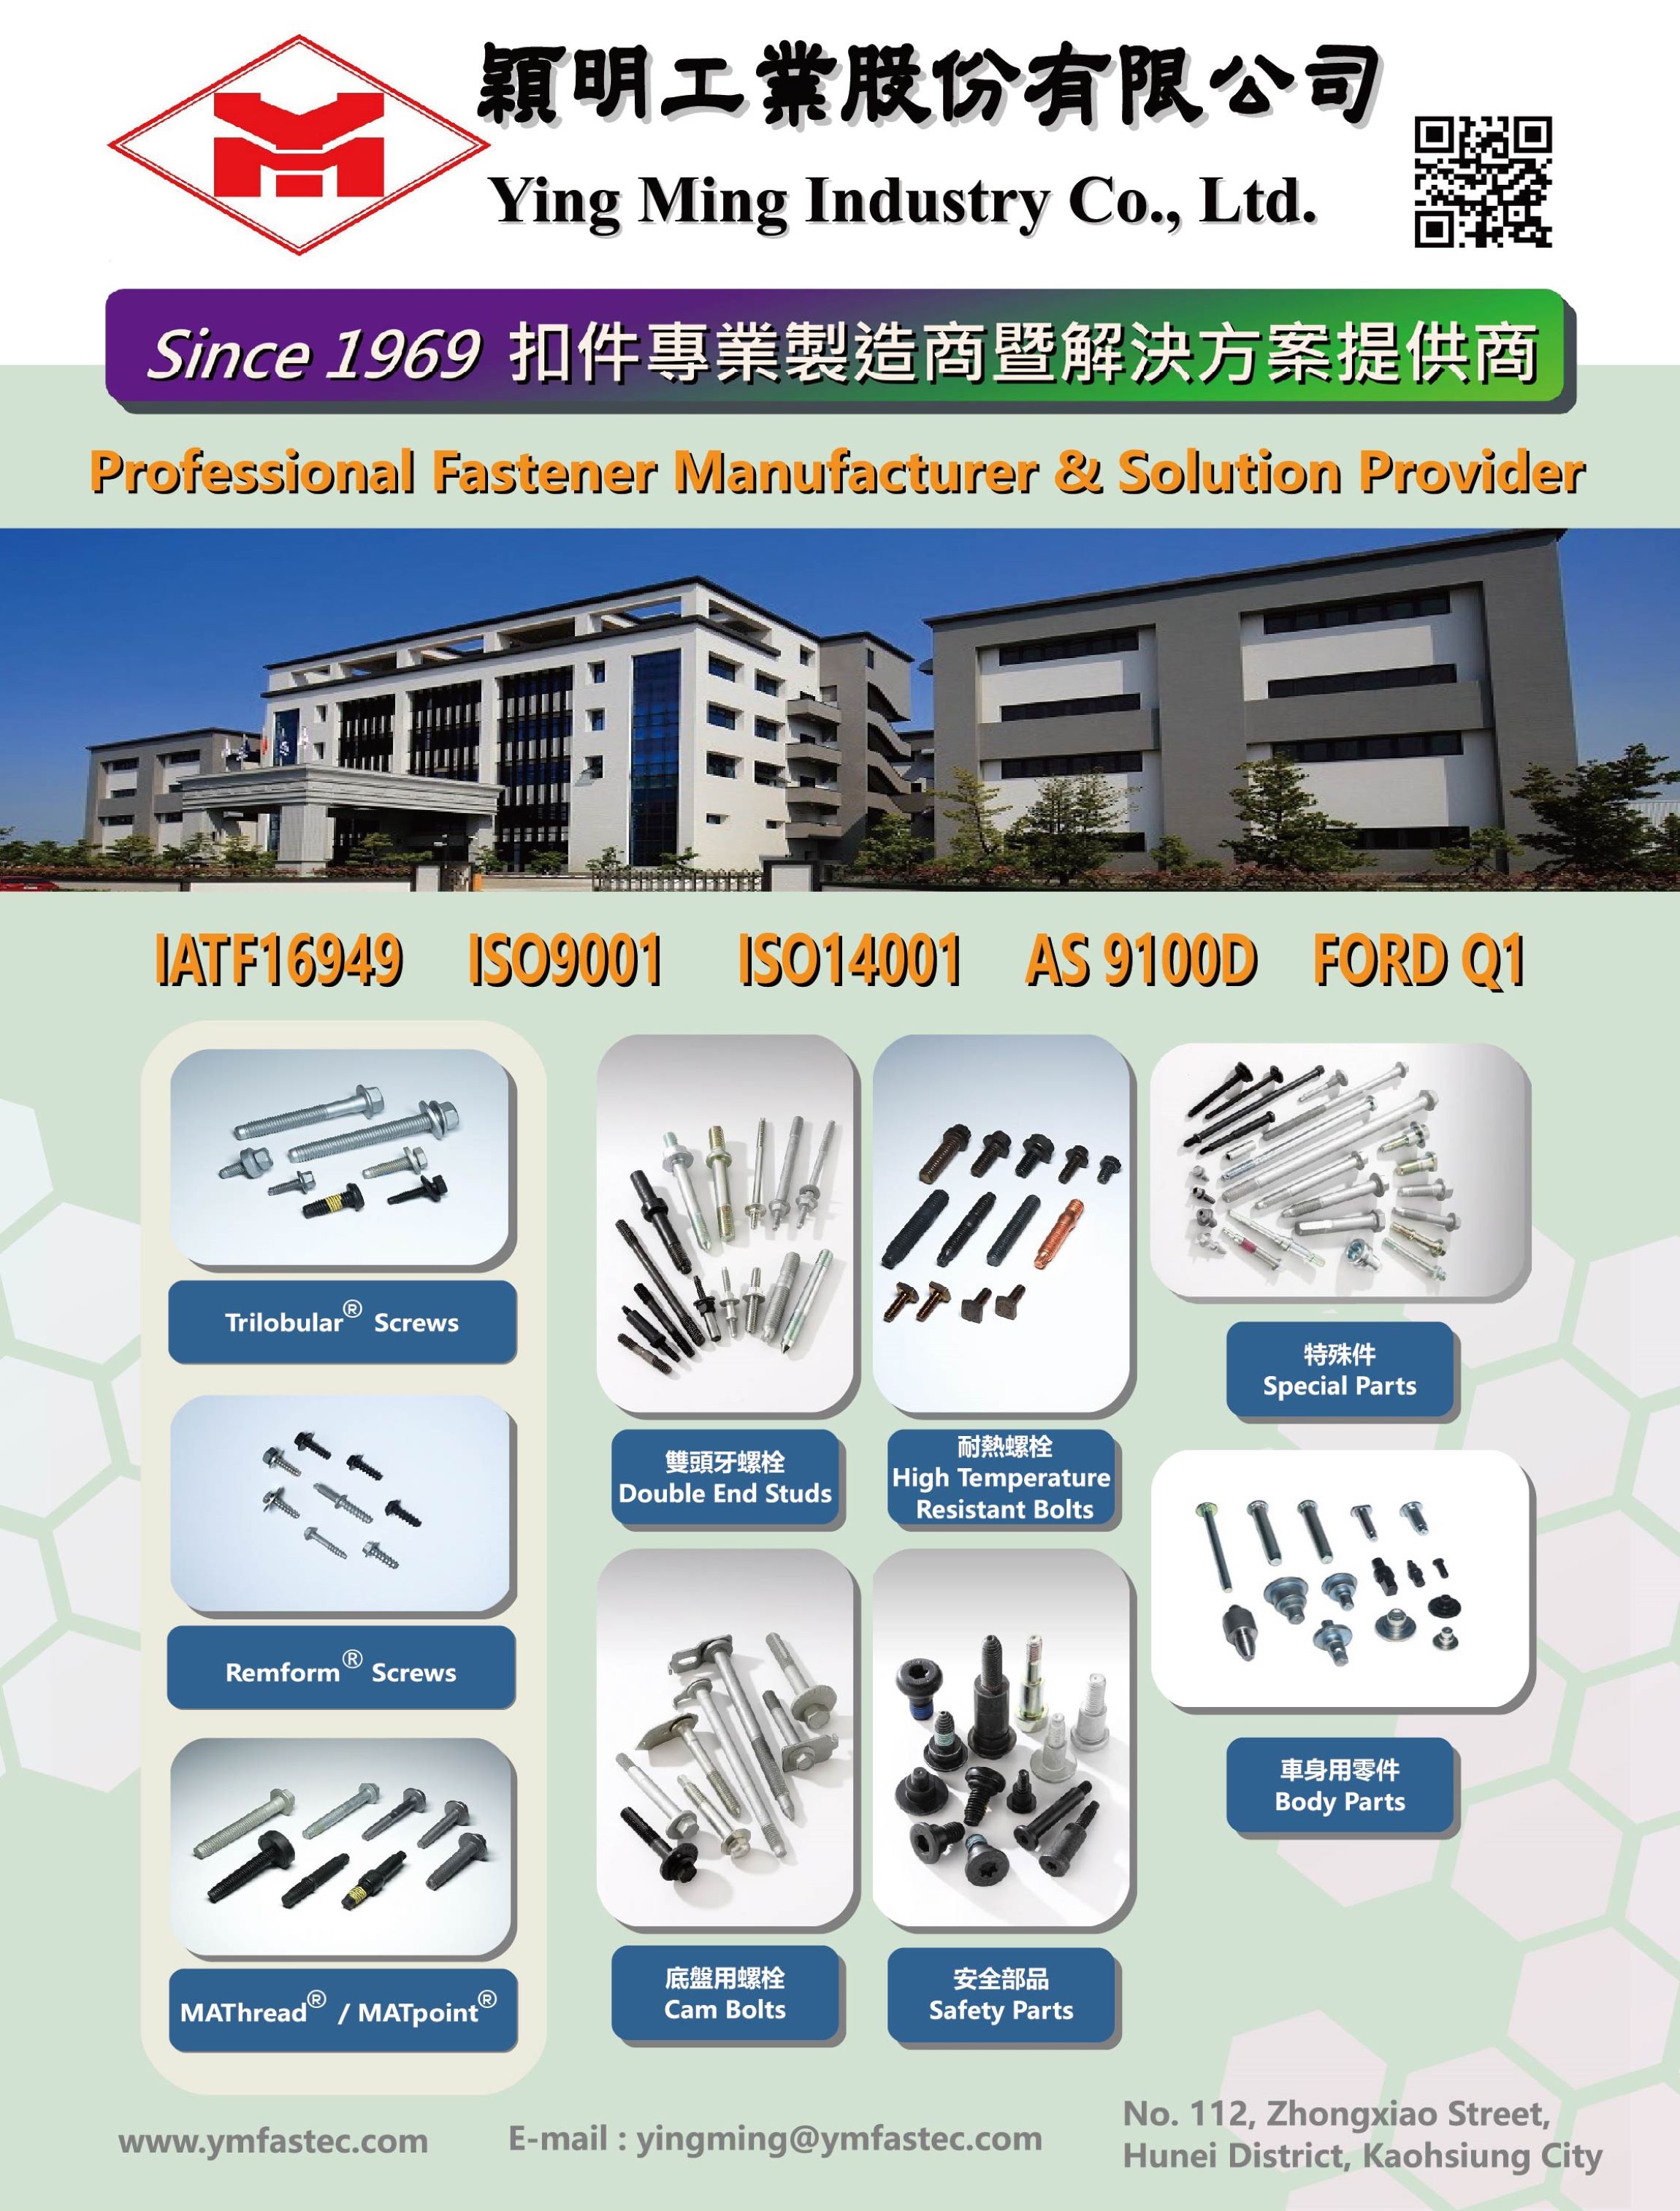 YING MING INDUSTRY CO., LTD.